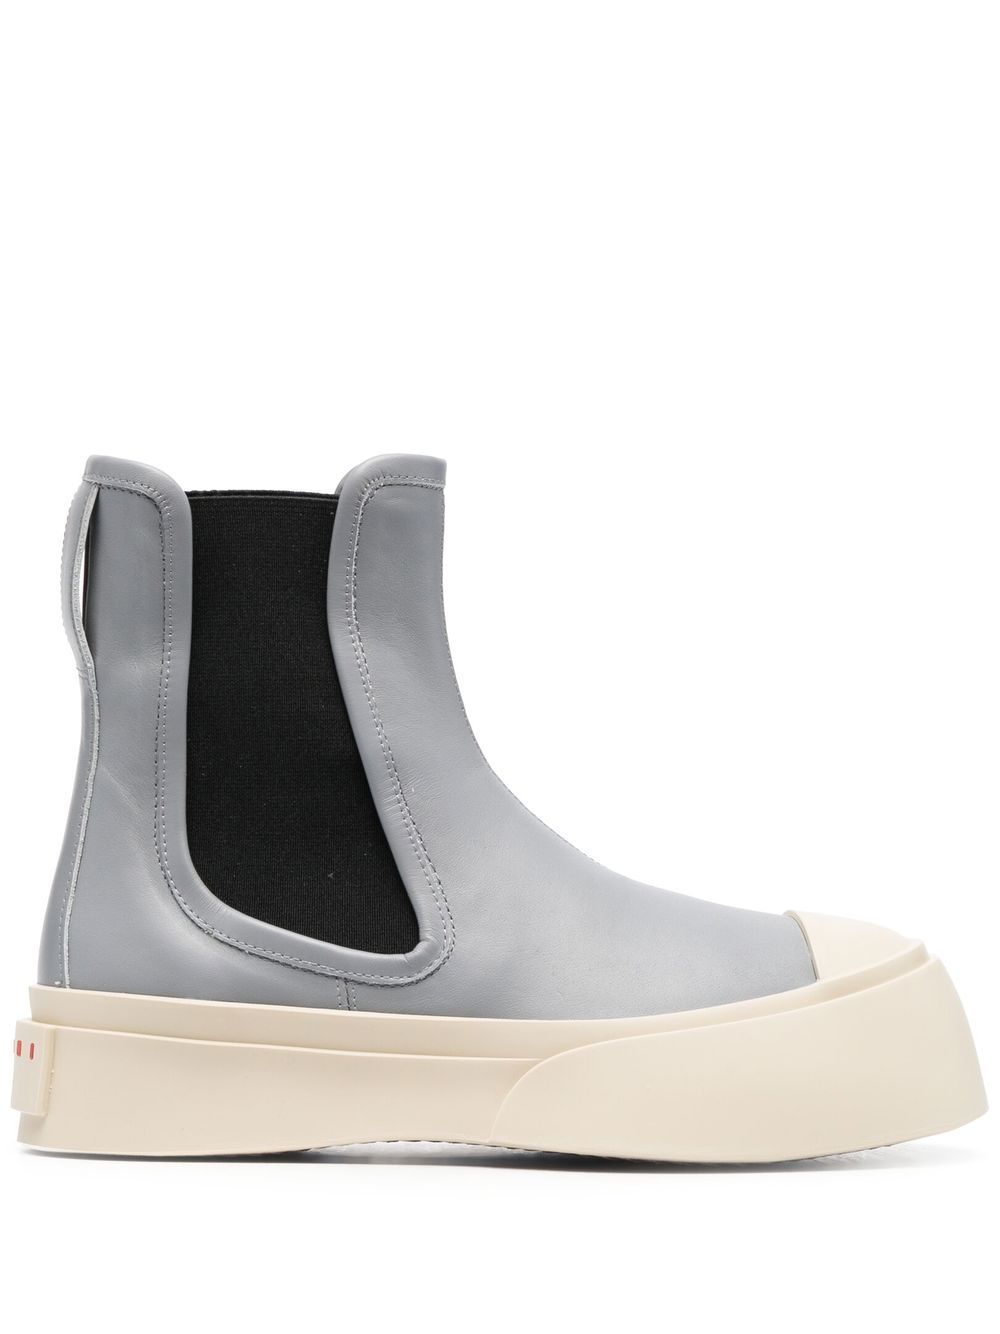 Marni slip-on Ankle Boots - Farfetch